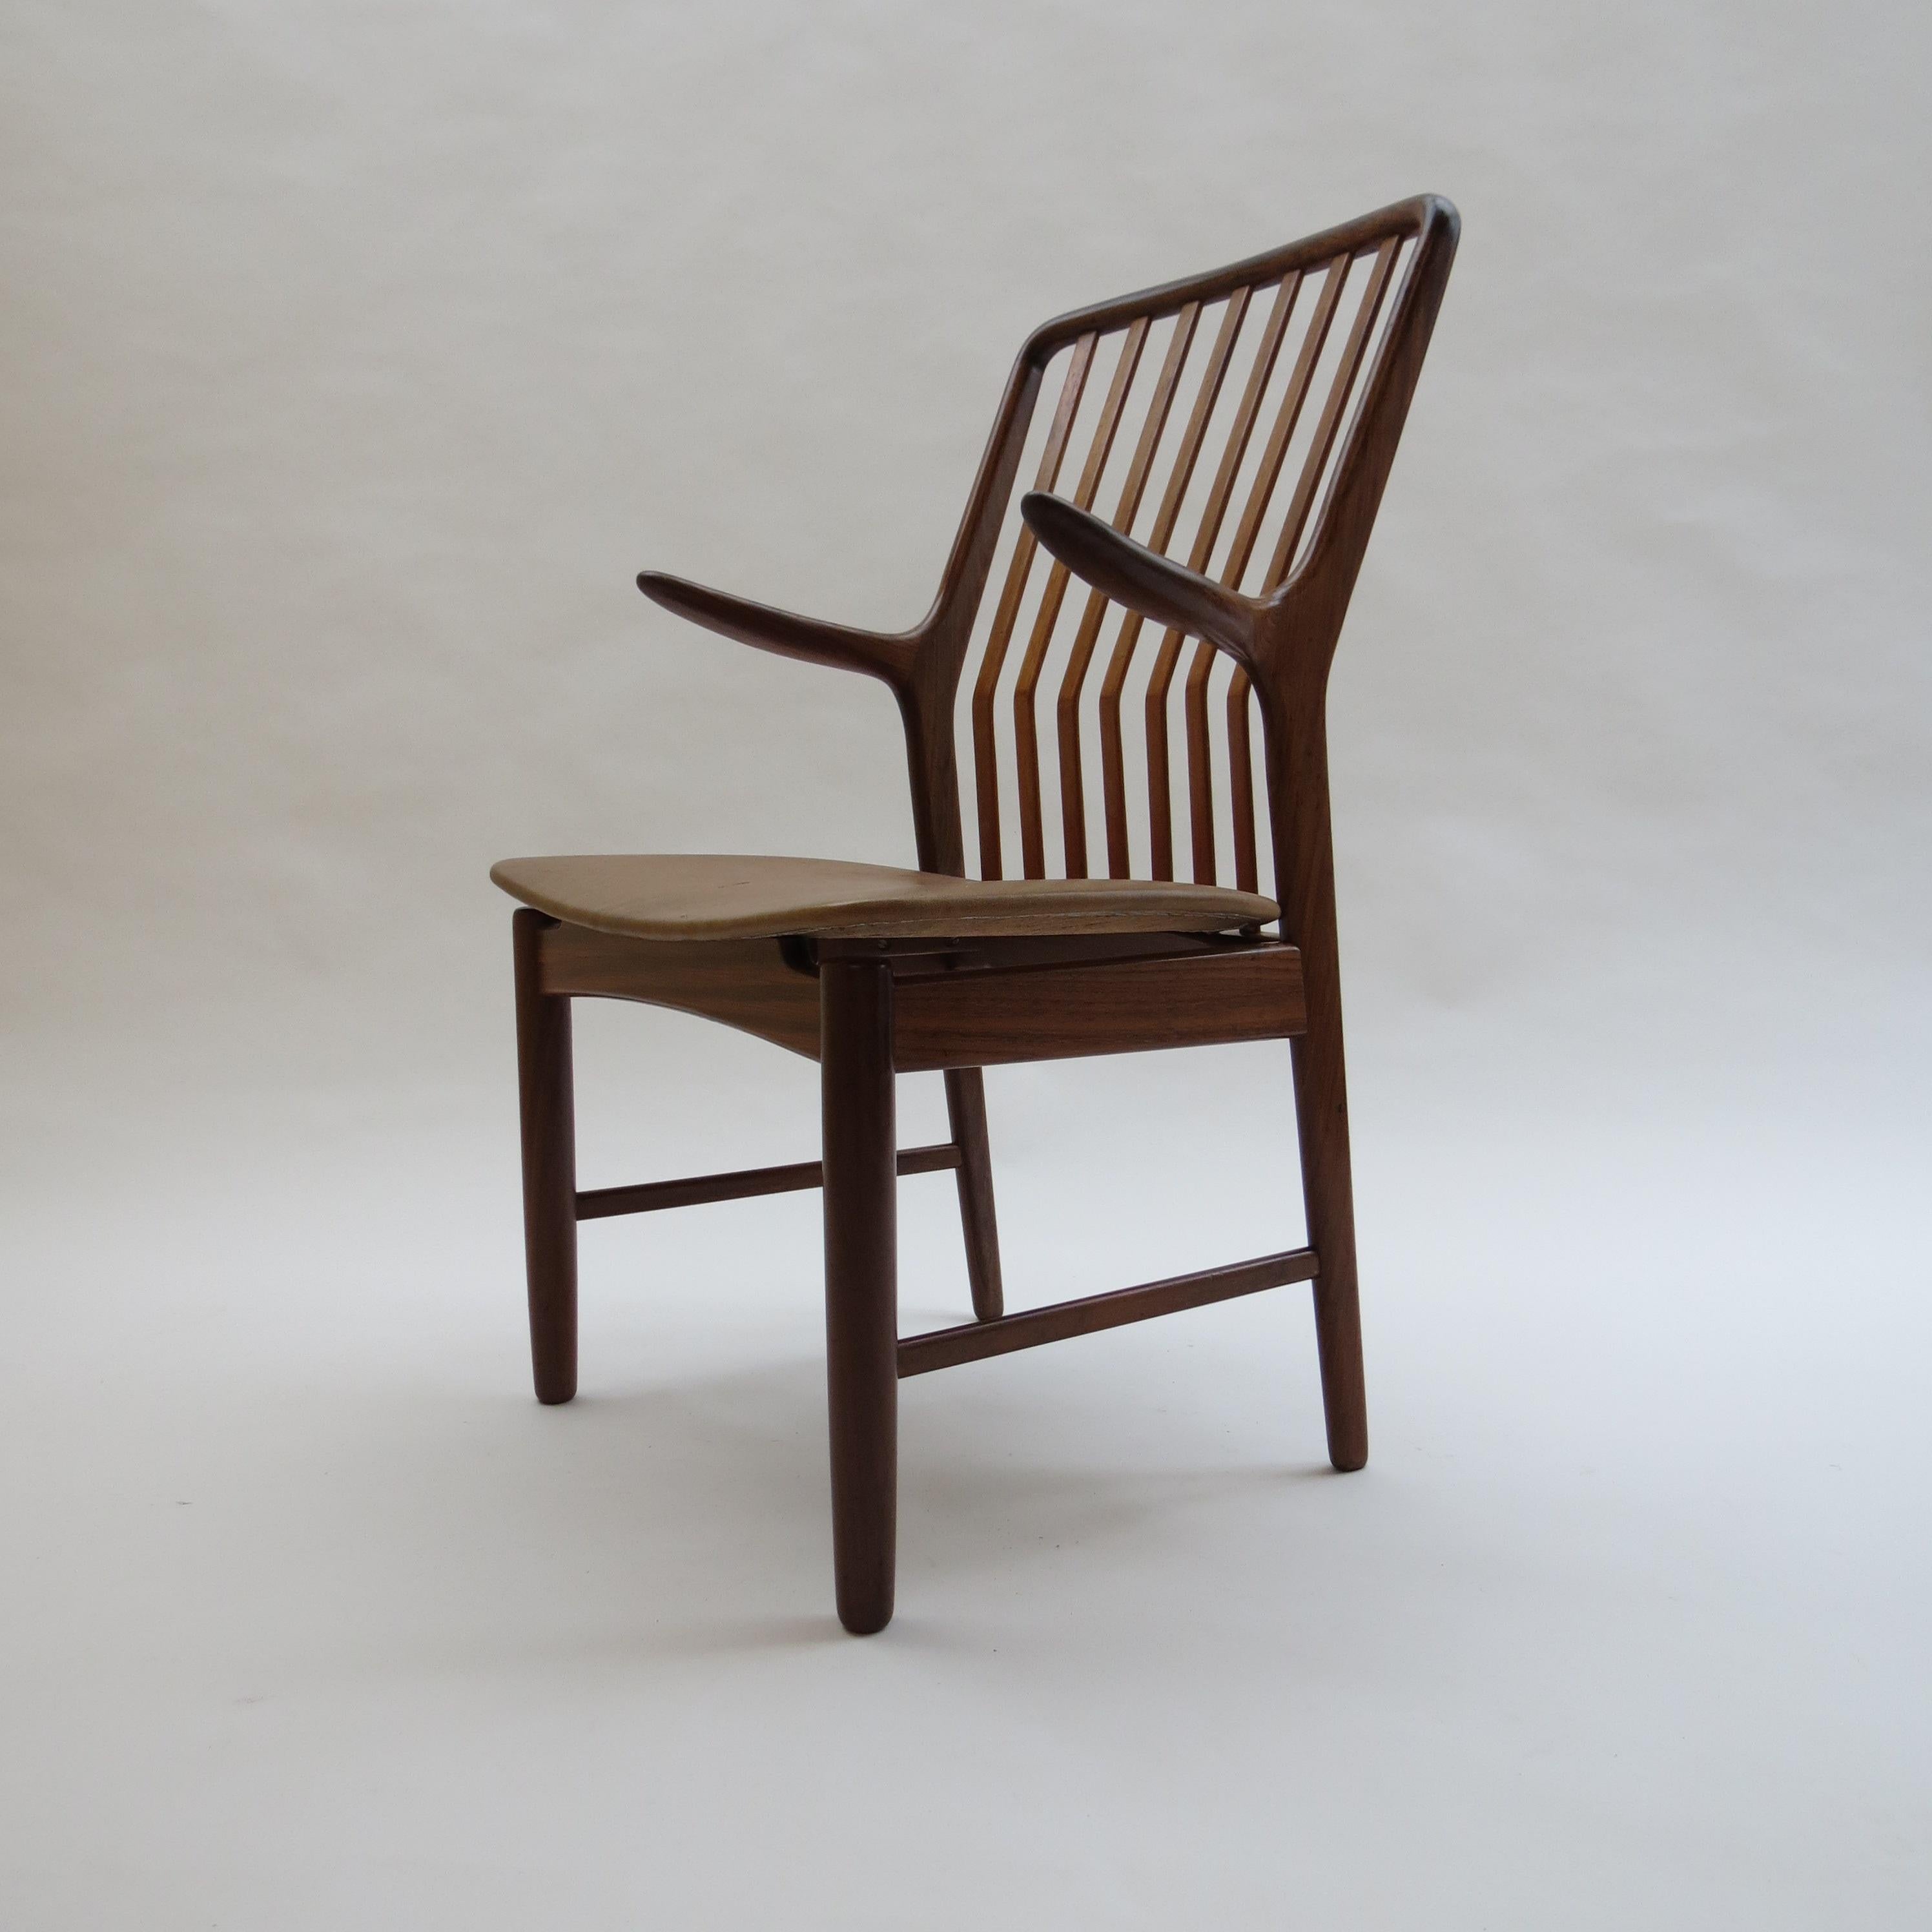 Midcentury Danish chair by Svend Madsen from the 1960s. Teak frame and newly reupholstered seat in vintage brown leather.

Designed by Svend Madsen, Denmark.

In good condition, the seat has recently been reupholstered with vintage leather.